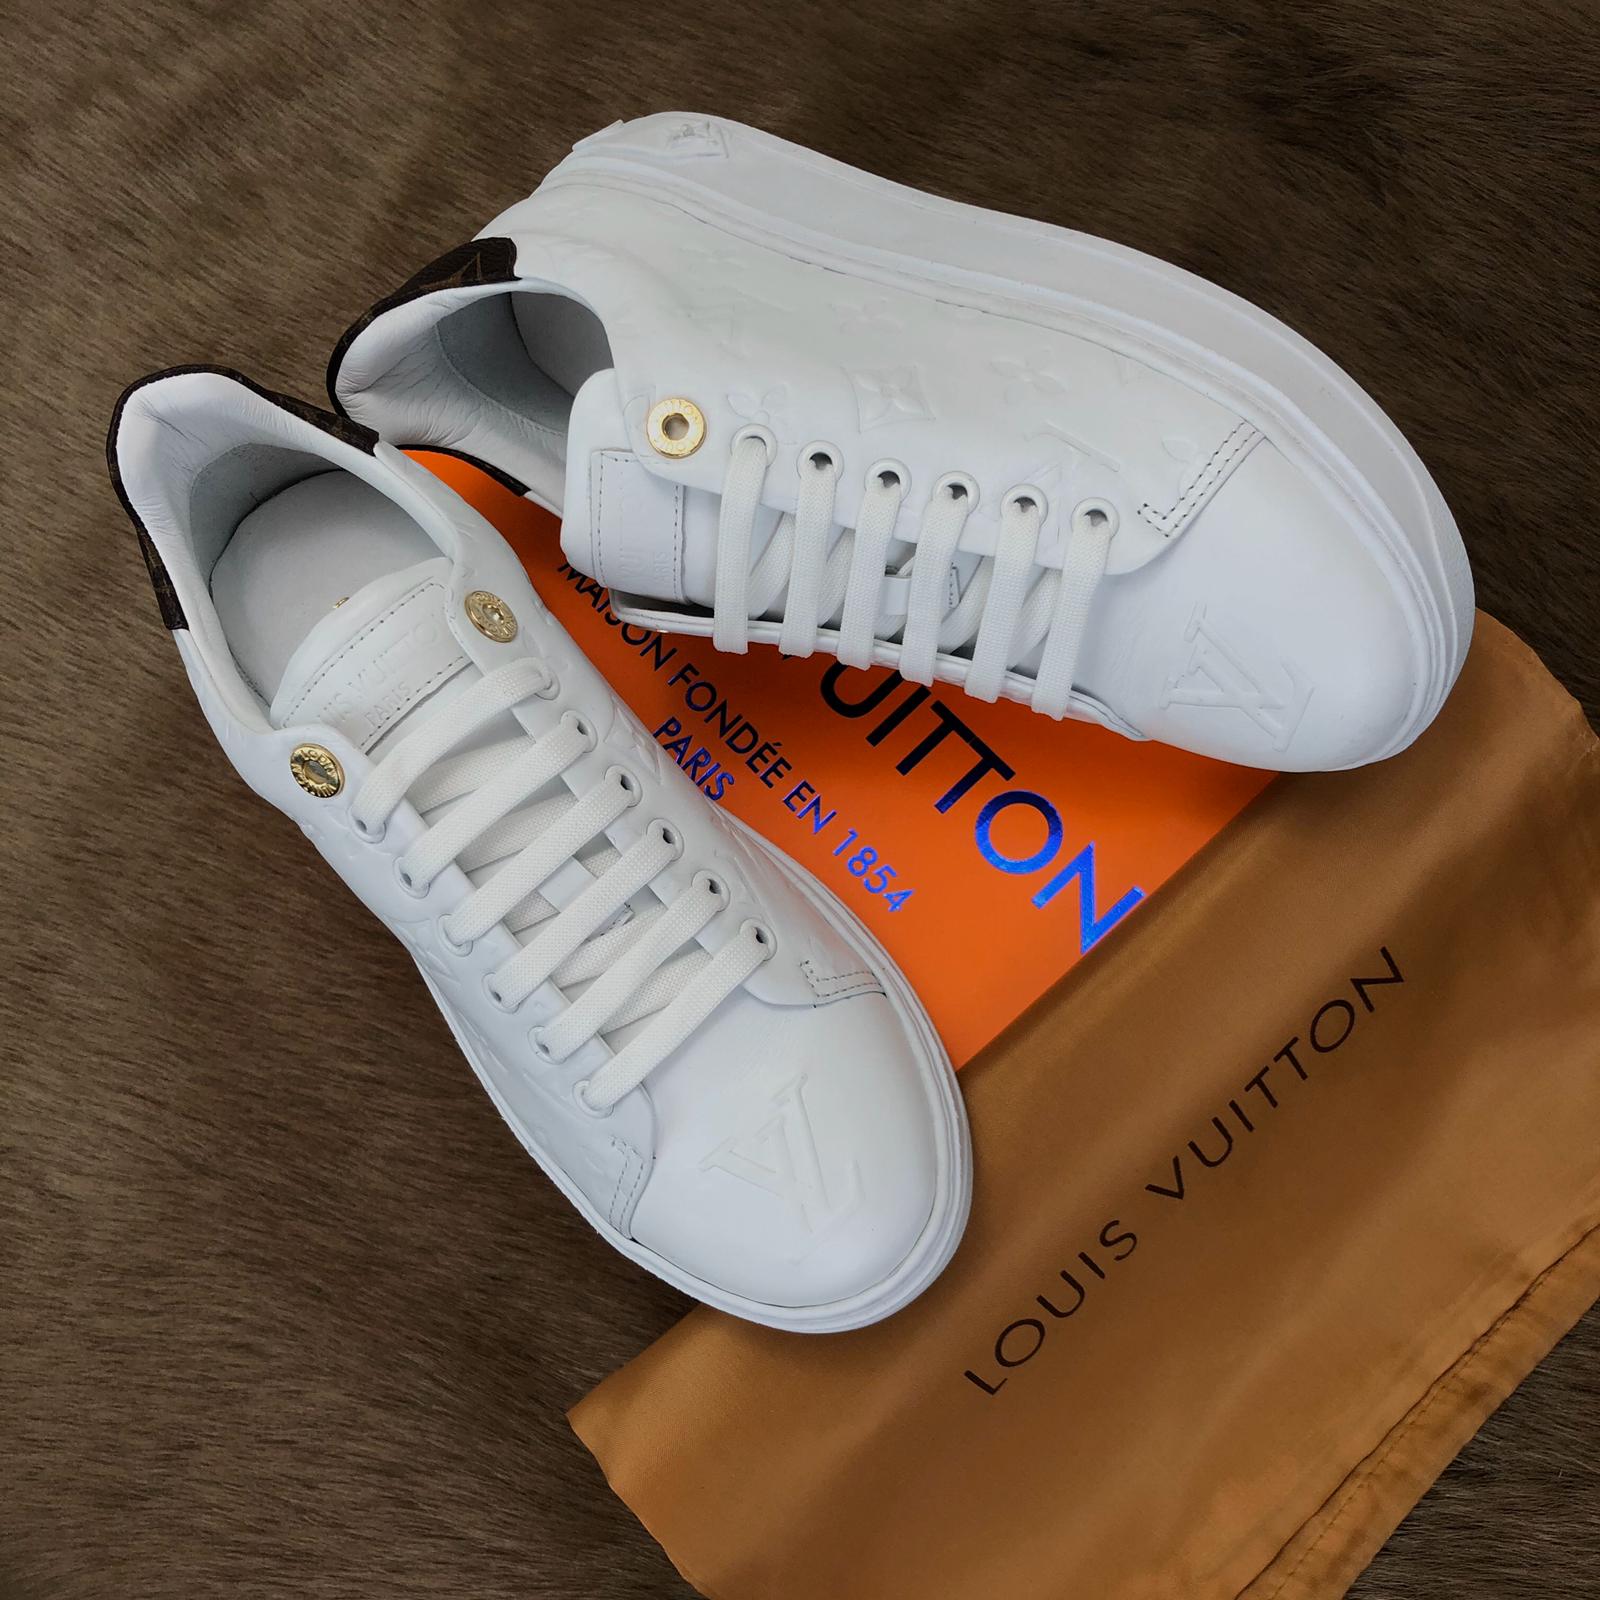 louis vuitton time out sneakers